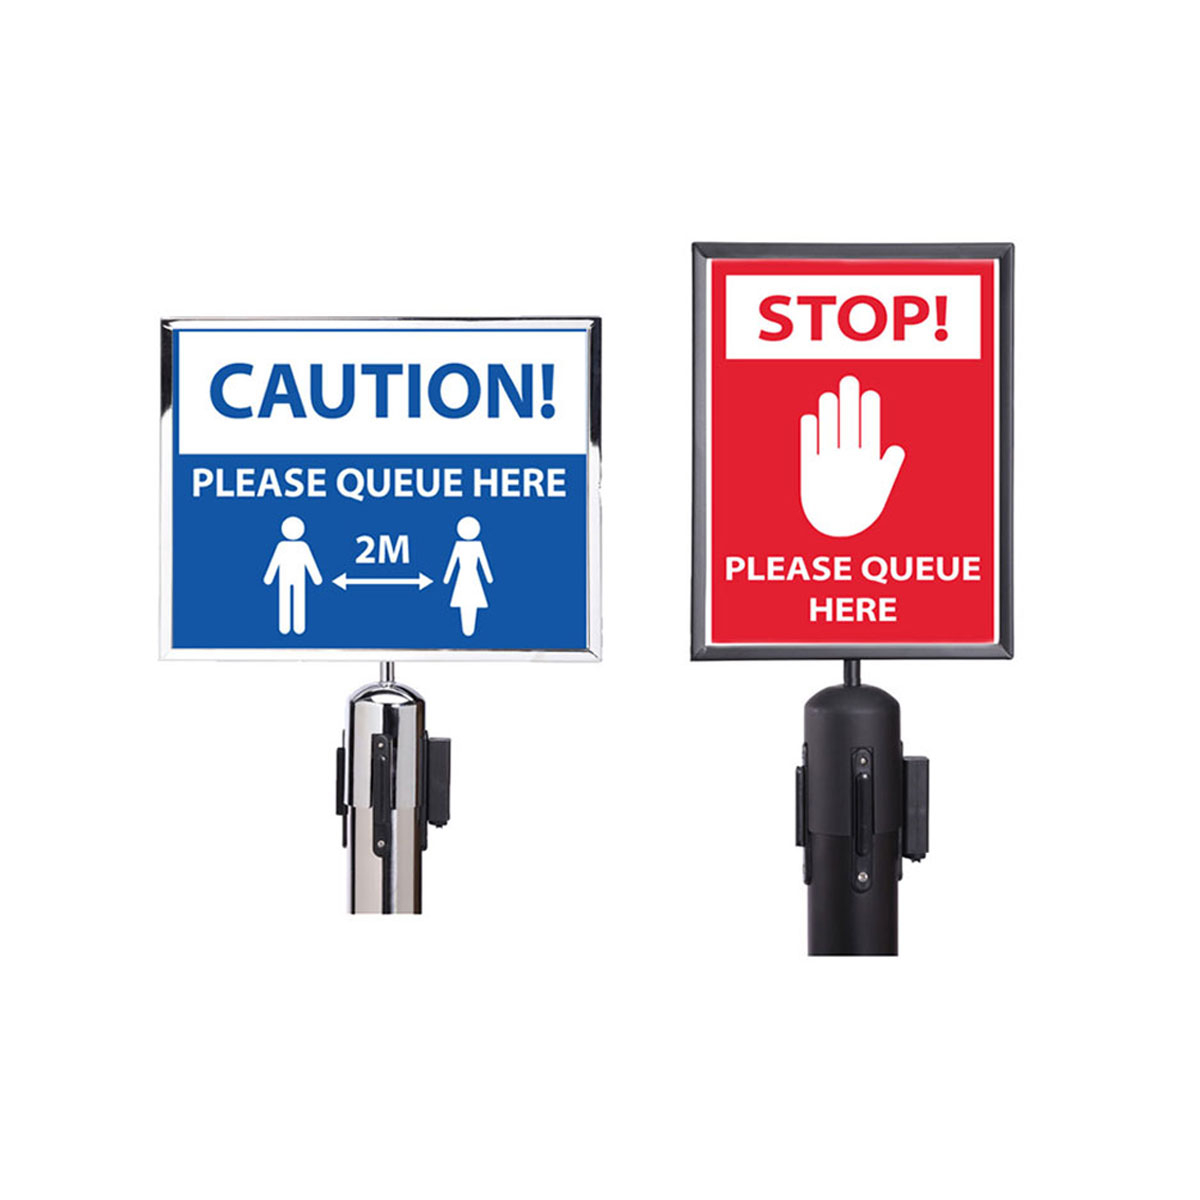 Queue Barrier Sign Holder. For Use With  Retractable Queue Barriers. Work With All Major Brands. A3 or A4 Size Complete With Post Adaptor For Quick & Easy Fit. 